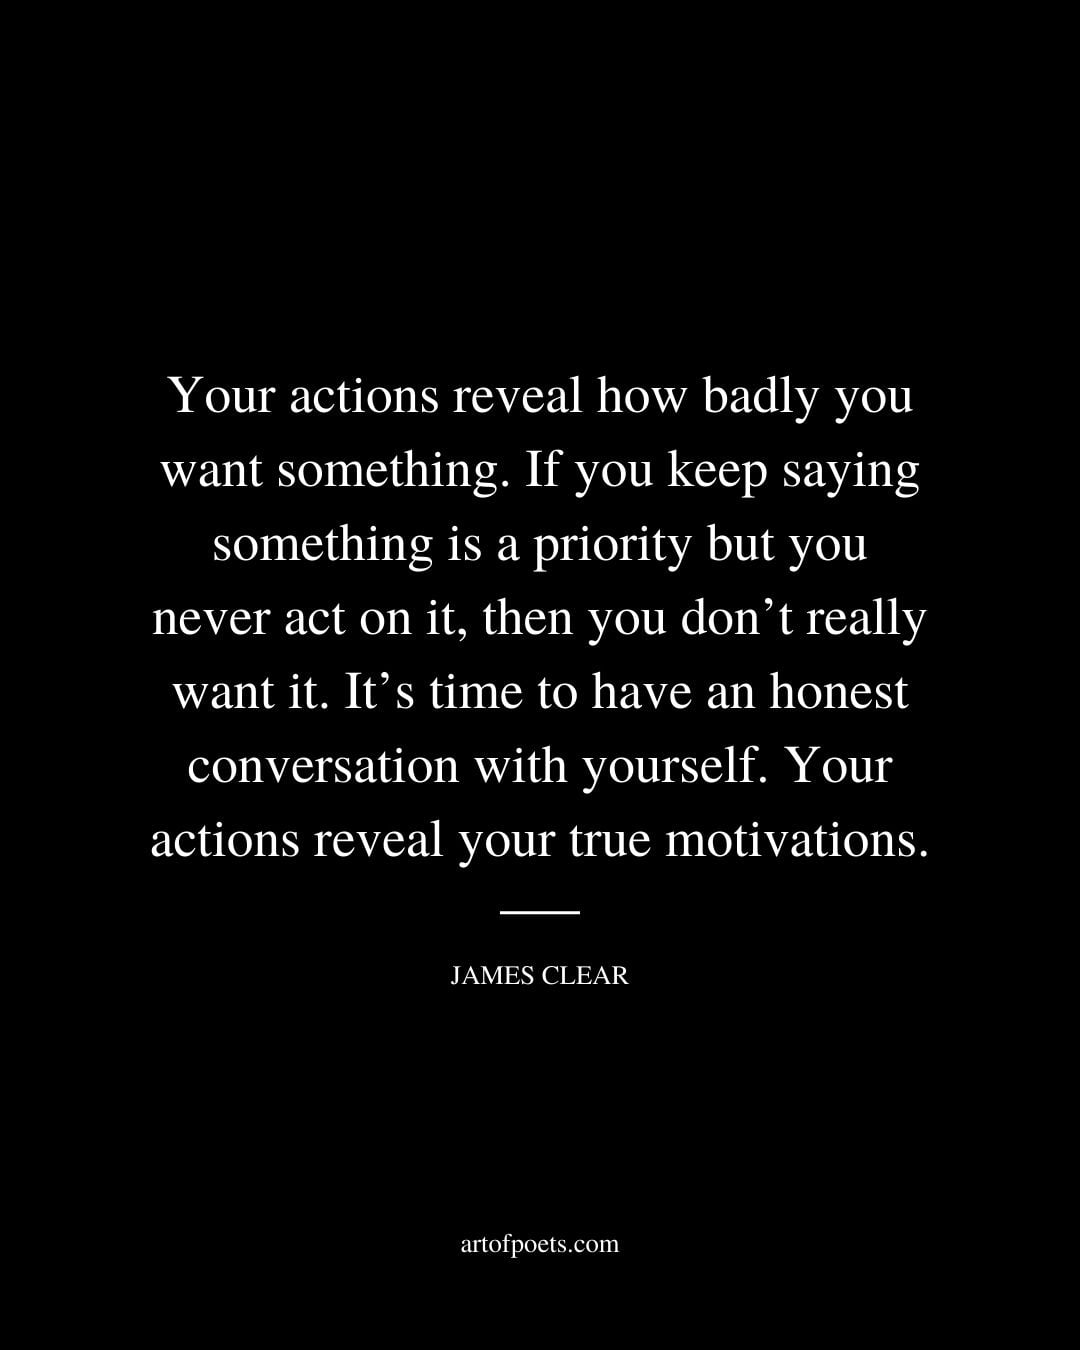 Your actions reveal how badly you want something. If you keep saying something is a priority but you never act on it then you dont really want it